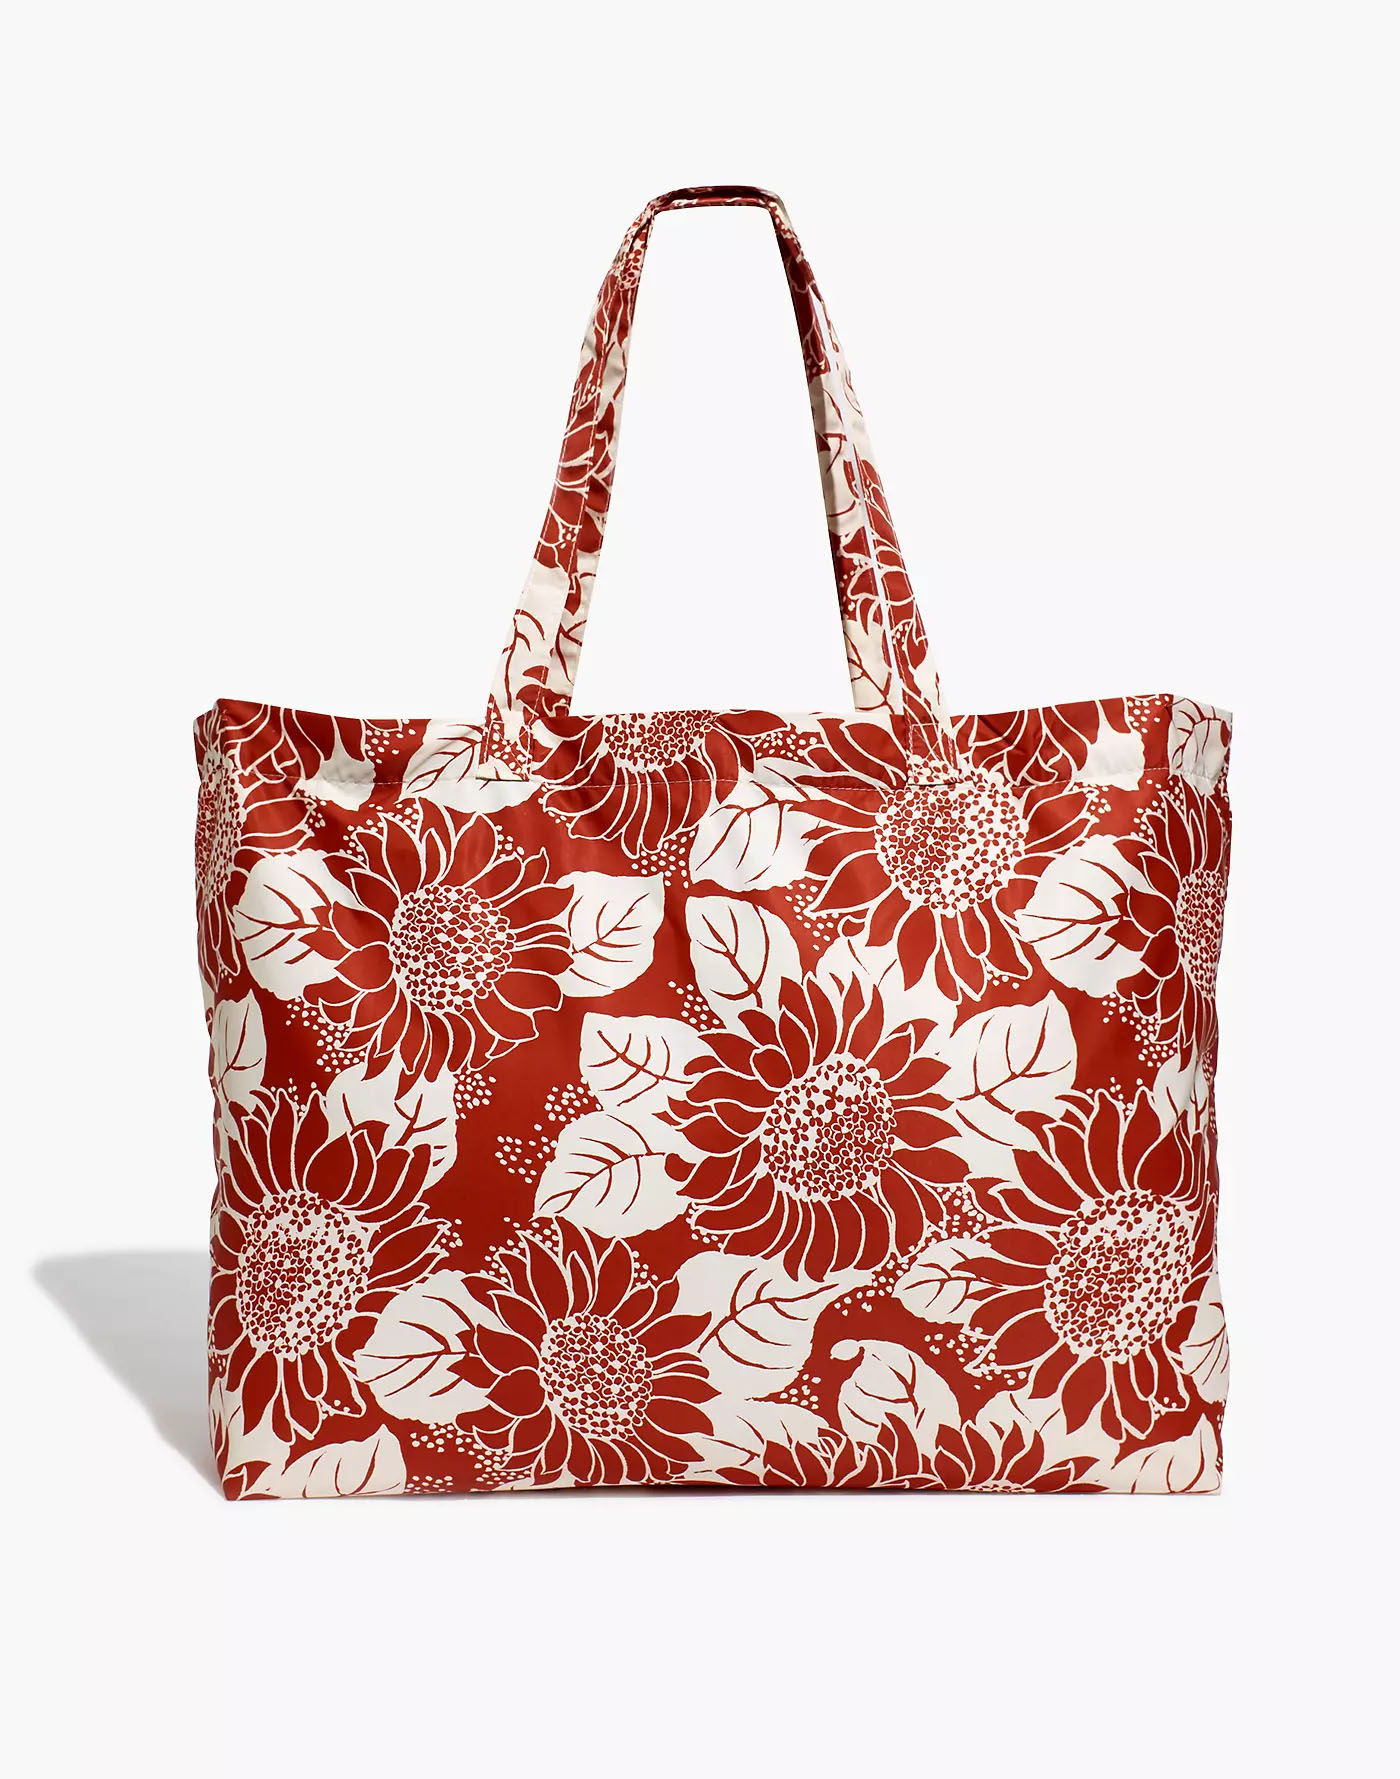 30 Best Tote Bags for Women—From Braided-Leather Carryalls to